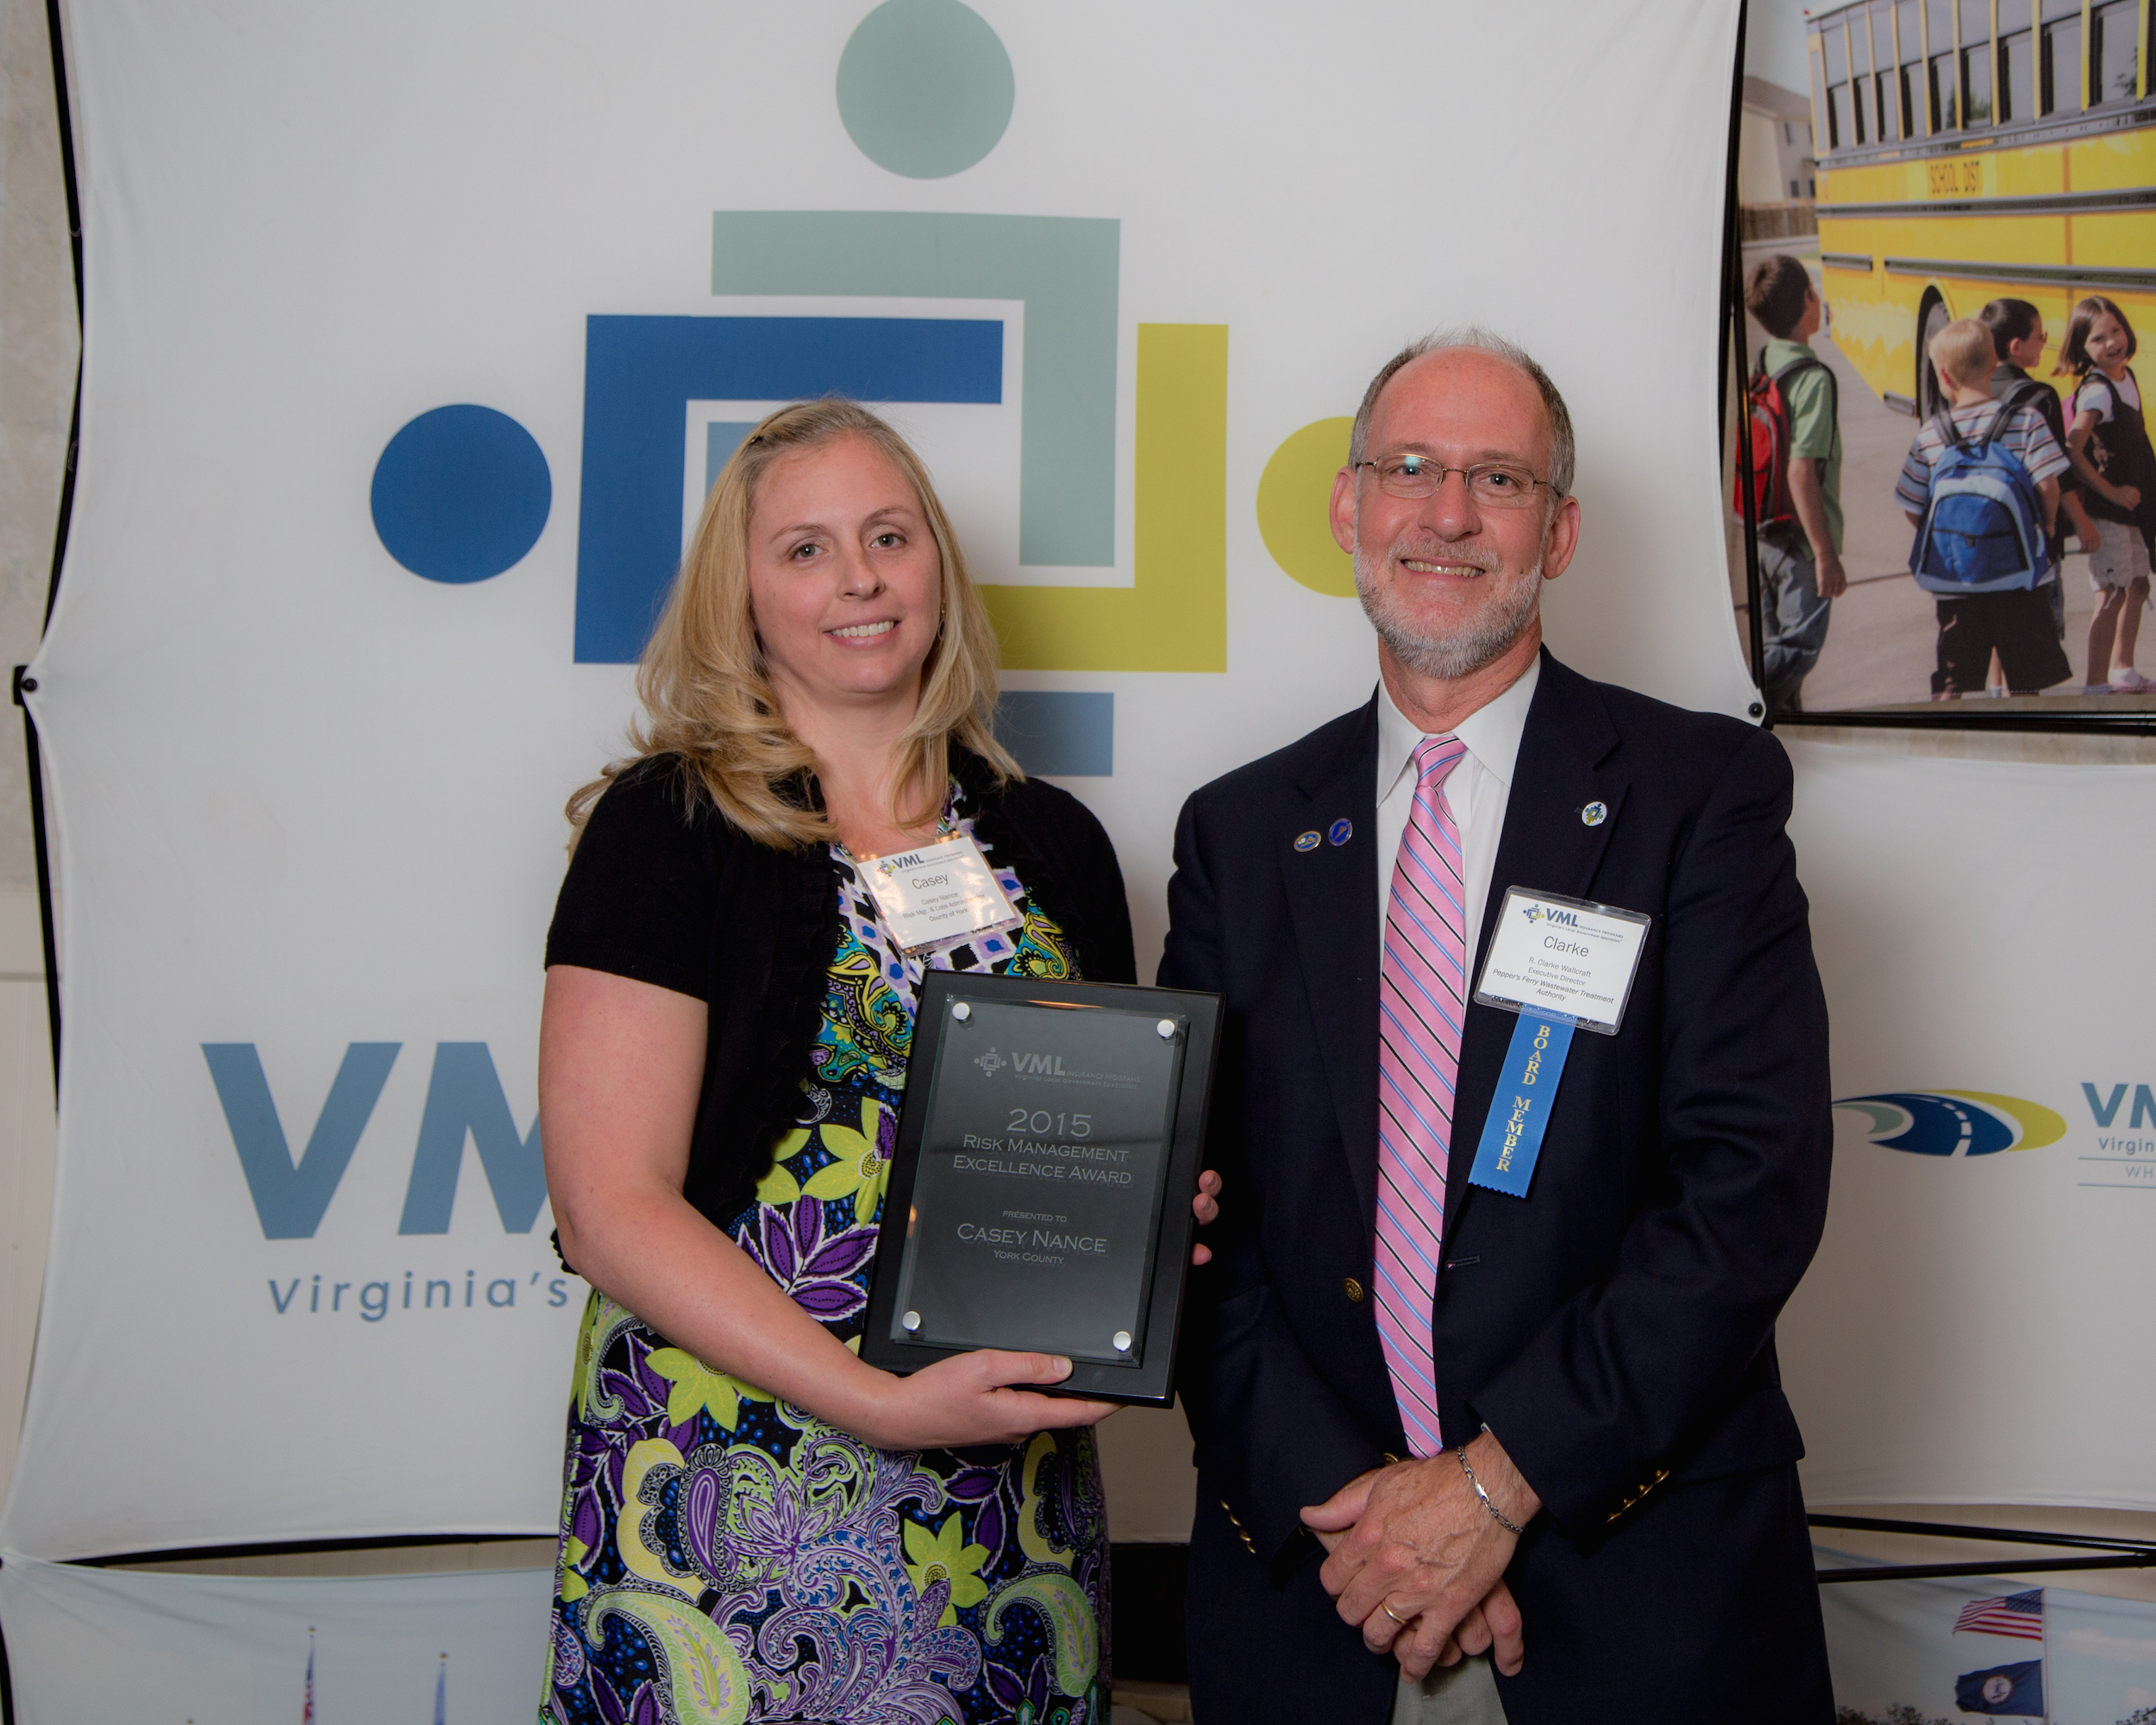 (L to R): Casey Nance with York County and VMLIP Members’ Supervisory Board Member Clarke Wallcraft